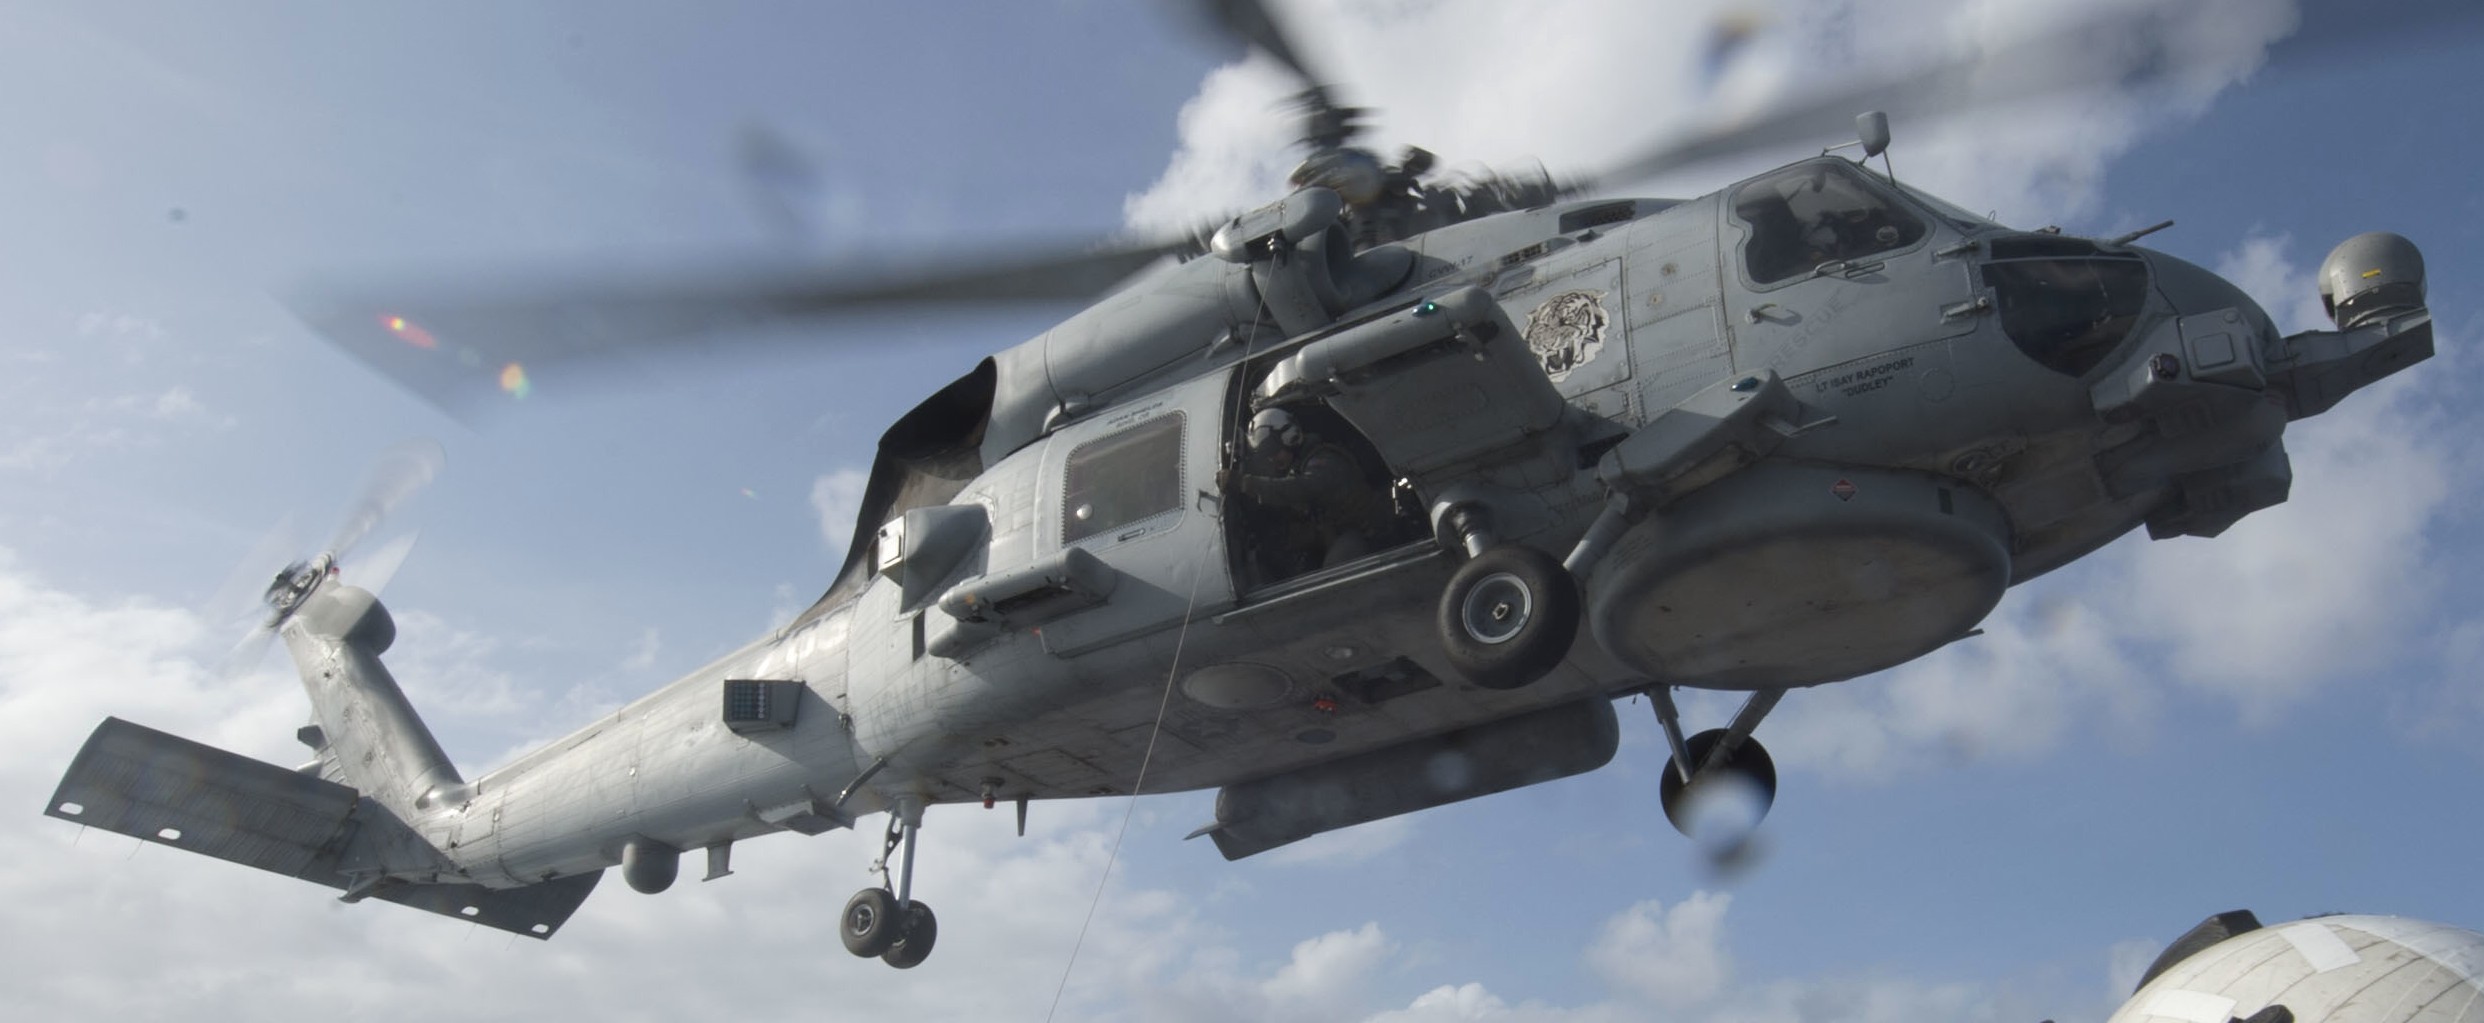 hsm-73 battlecats helicopter maritime strike squadron mh-60r seahawk ddg-102 uss sampson 12